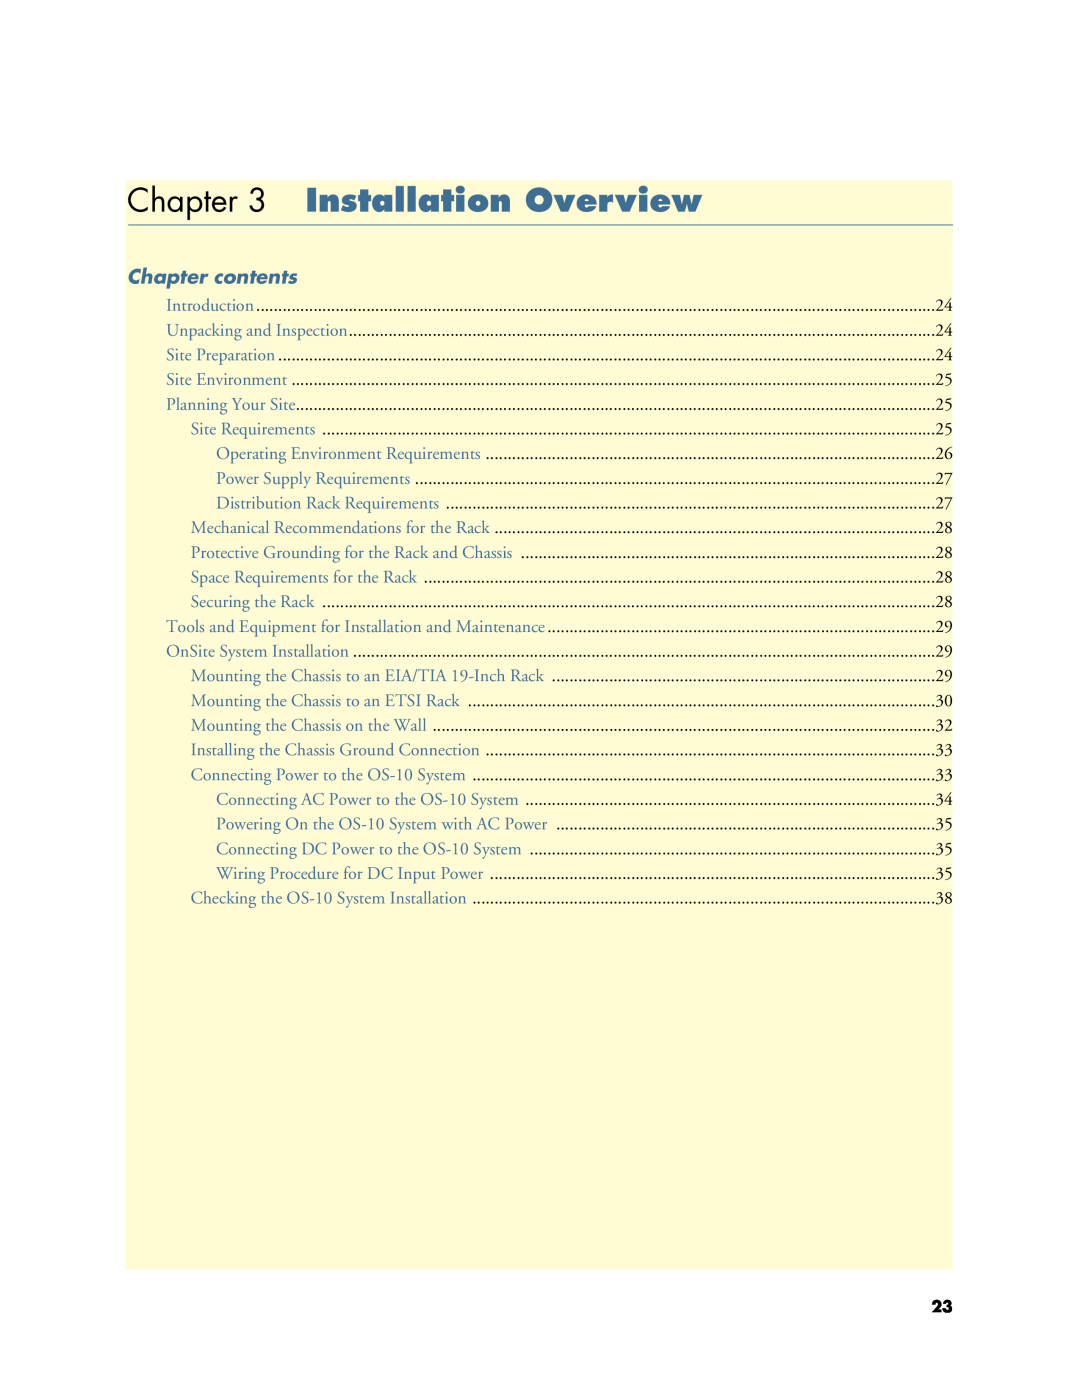 Patton electronic 1063, 07MOS10xx-GS manual Installation Overview, Chapter contents 